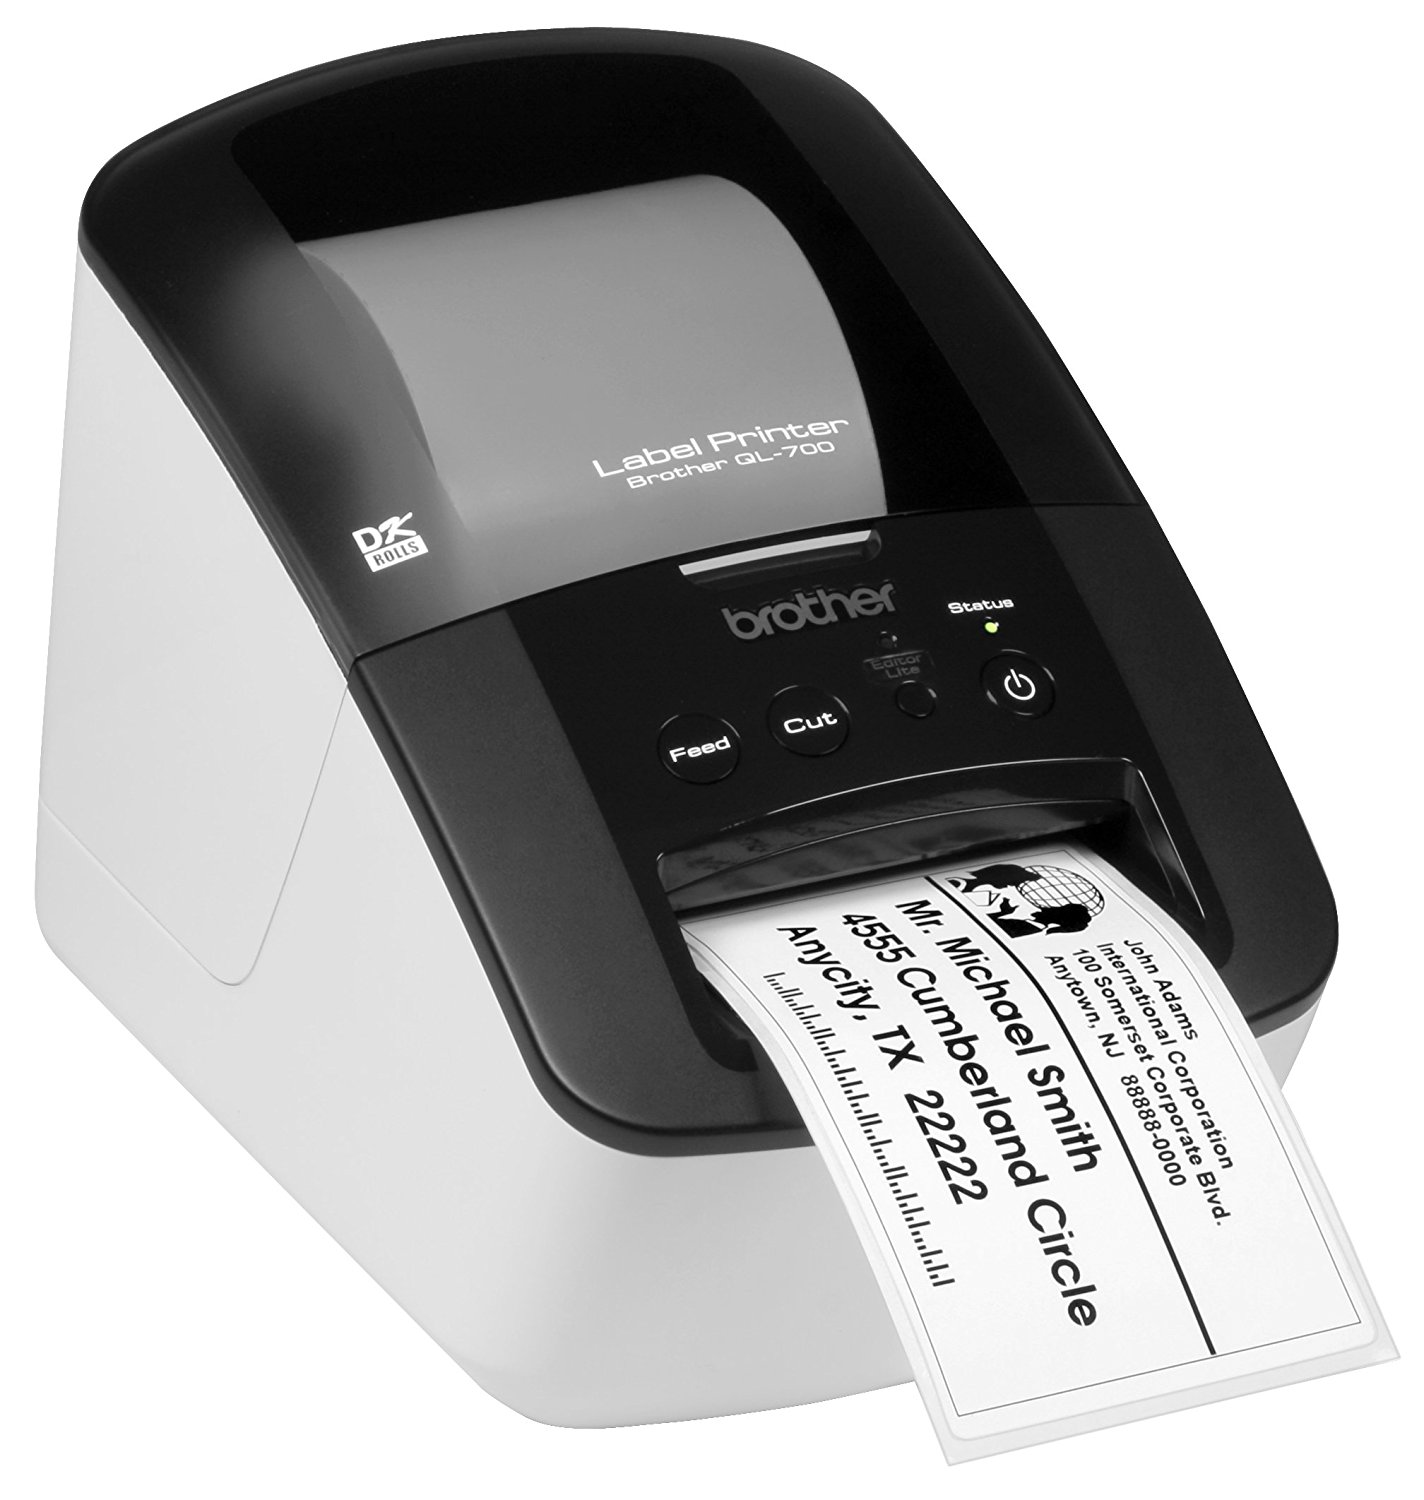 Brother QL-700 Professional Label Printer Review: Super-Fast, Cost Label Printing - Inkjet Wholesale Blog